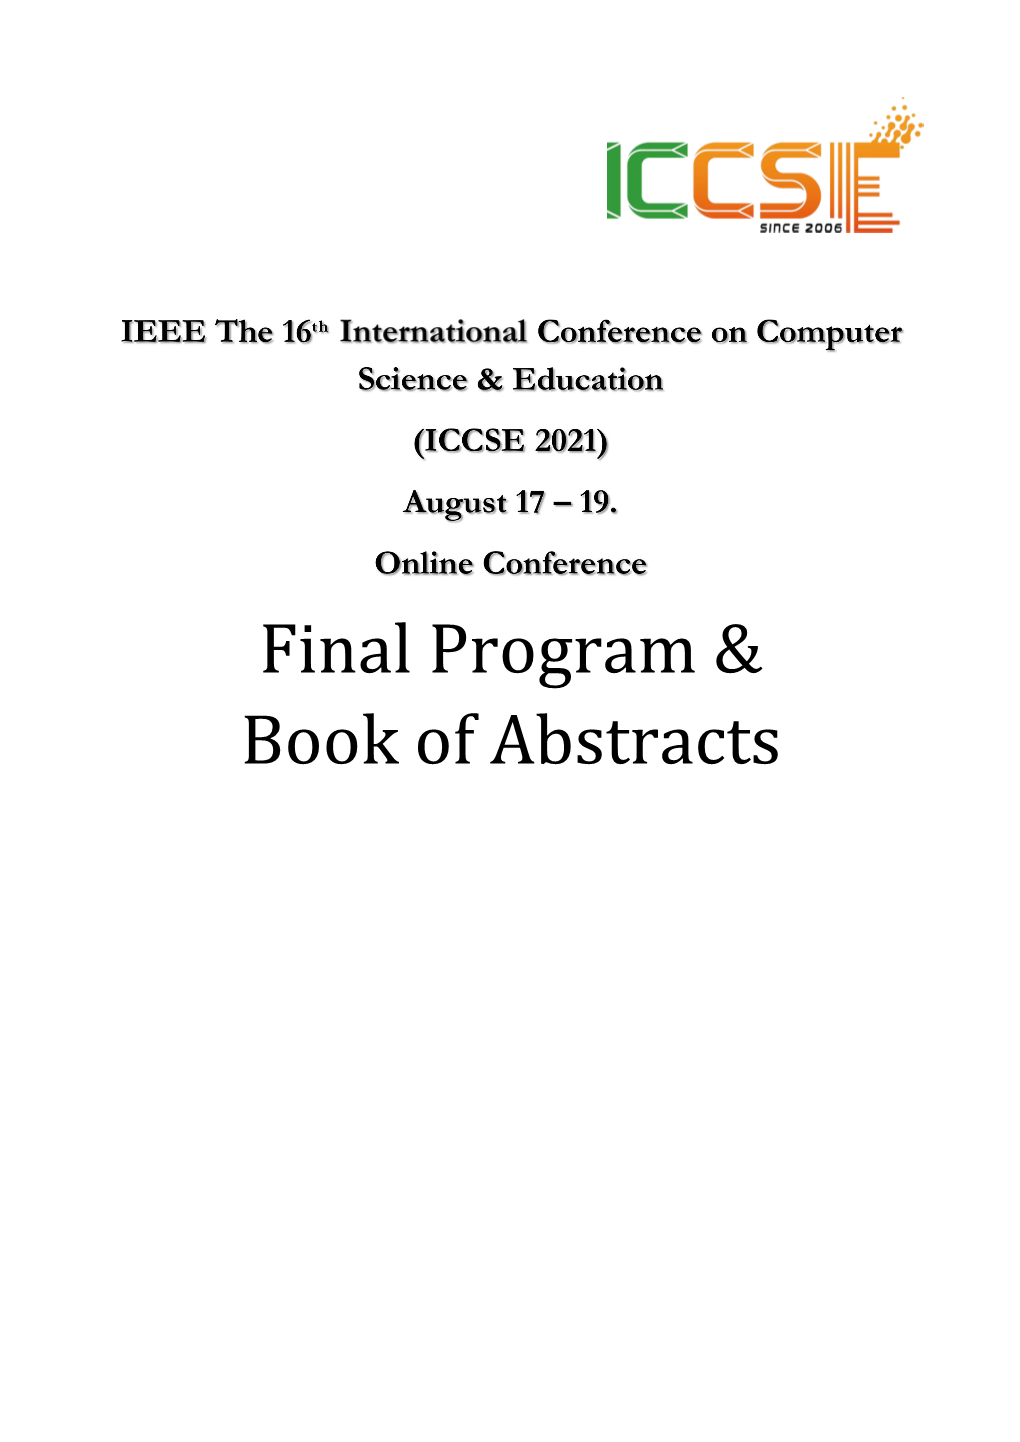 Final Program & Book of Abstracts